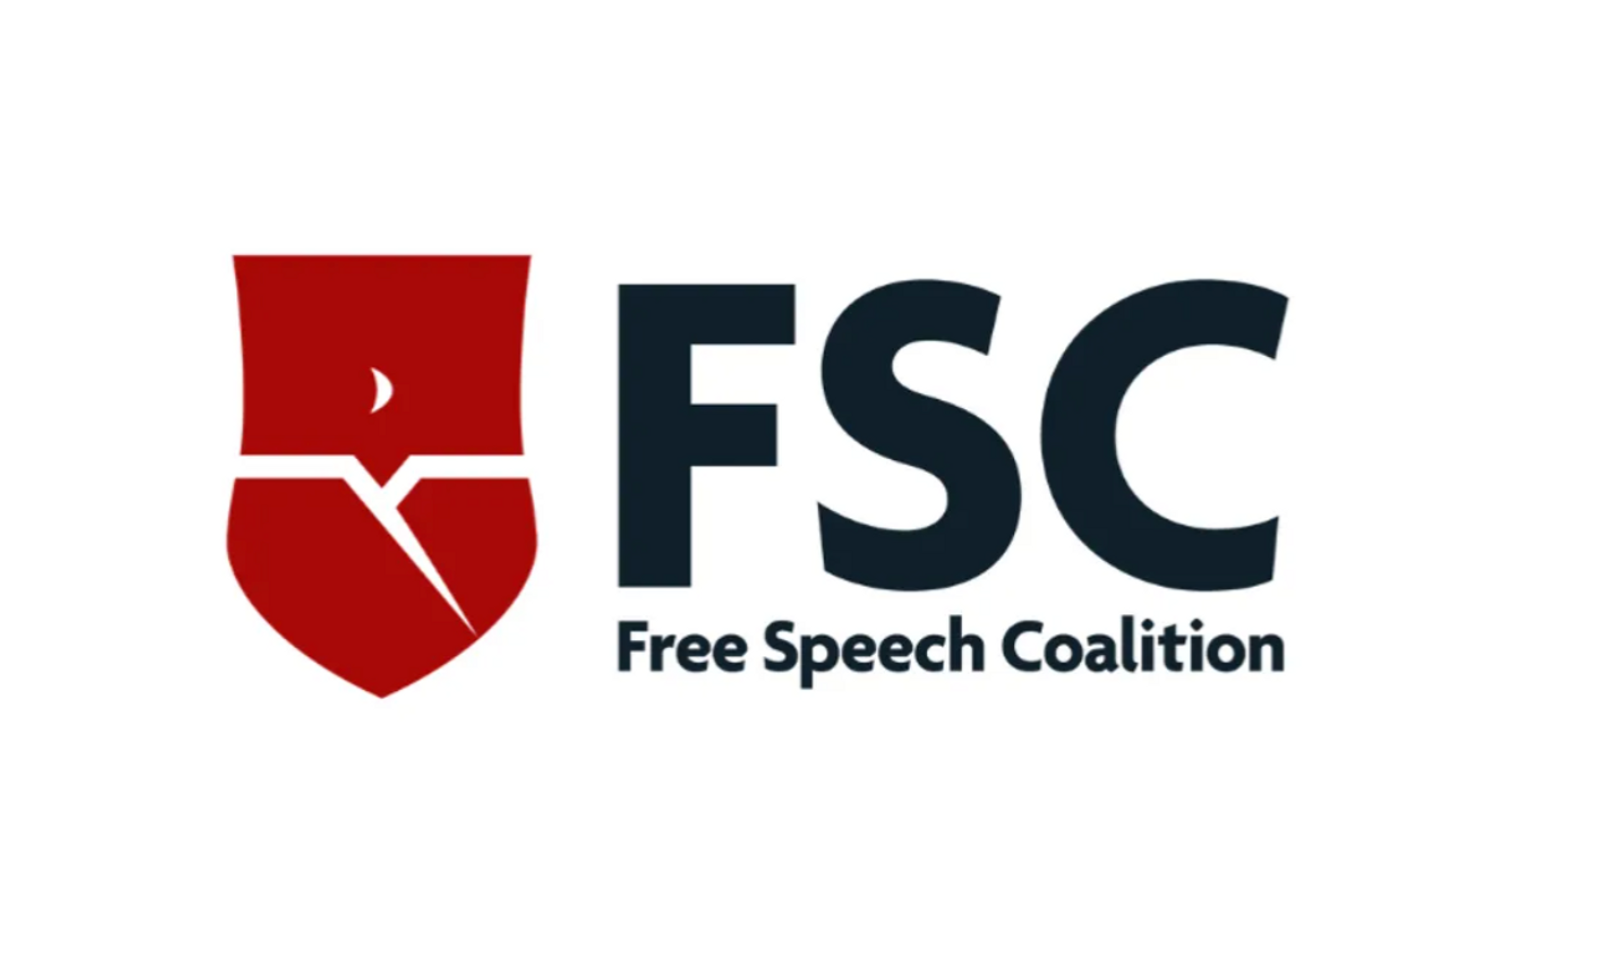 FSC Joins ACLU, CDT to File Amicus Briefs in Section 230 Cases